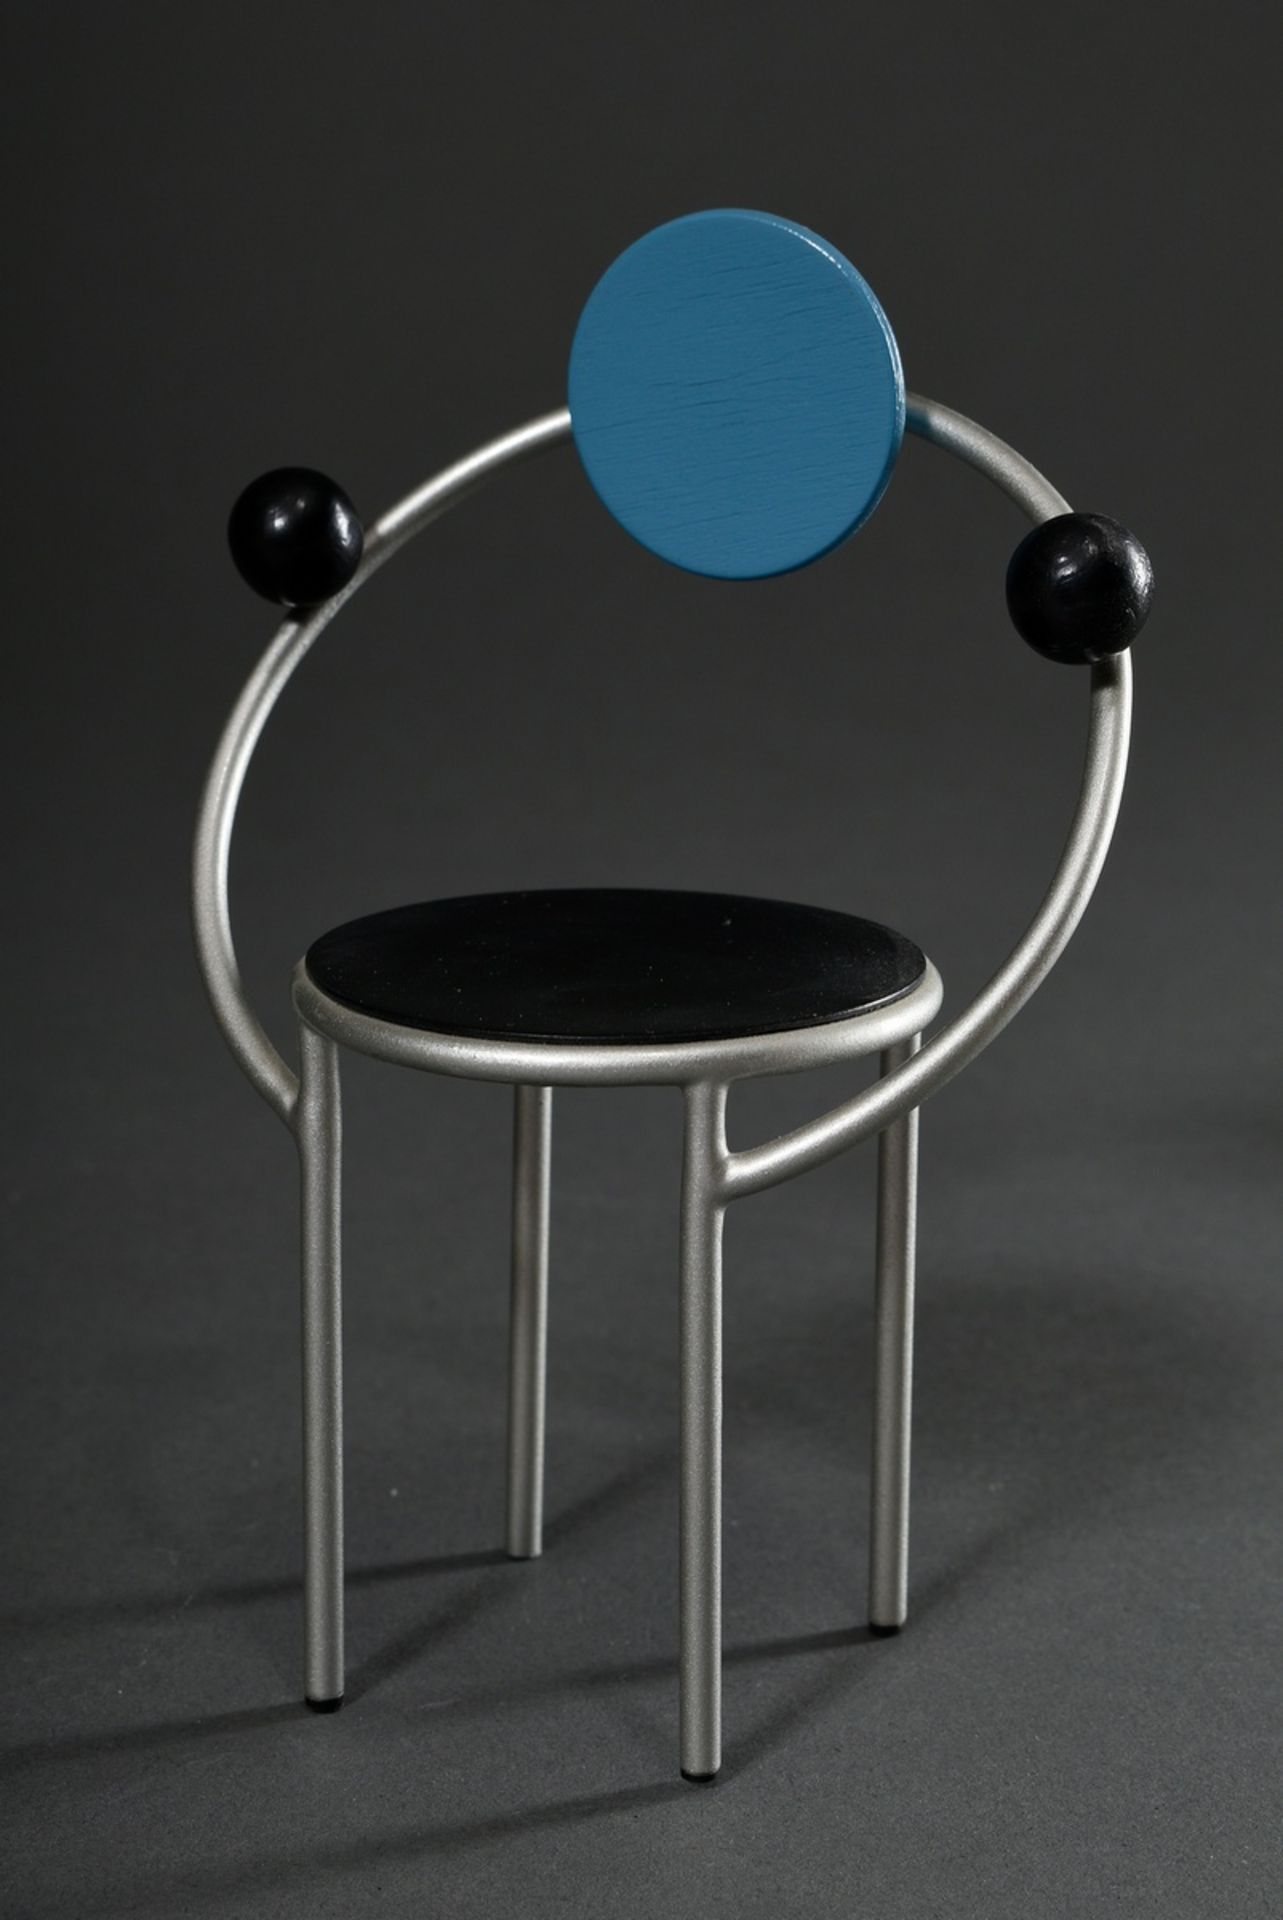 Miniature model chair "First", design: Michele De Lucchi (Memphis Milano) 1983, steel/lacquered woo - Image 2 of 3